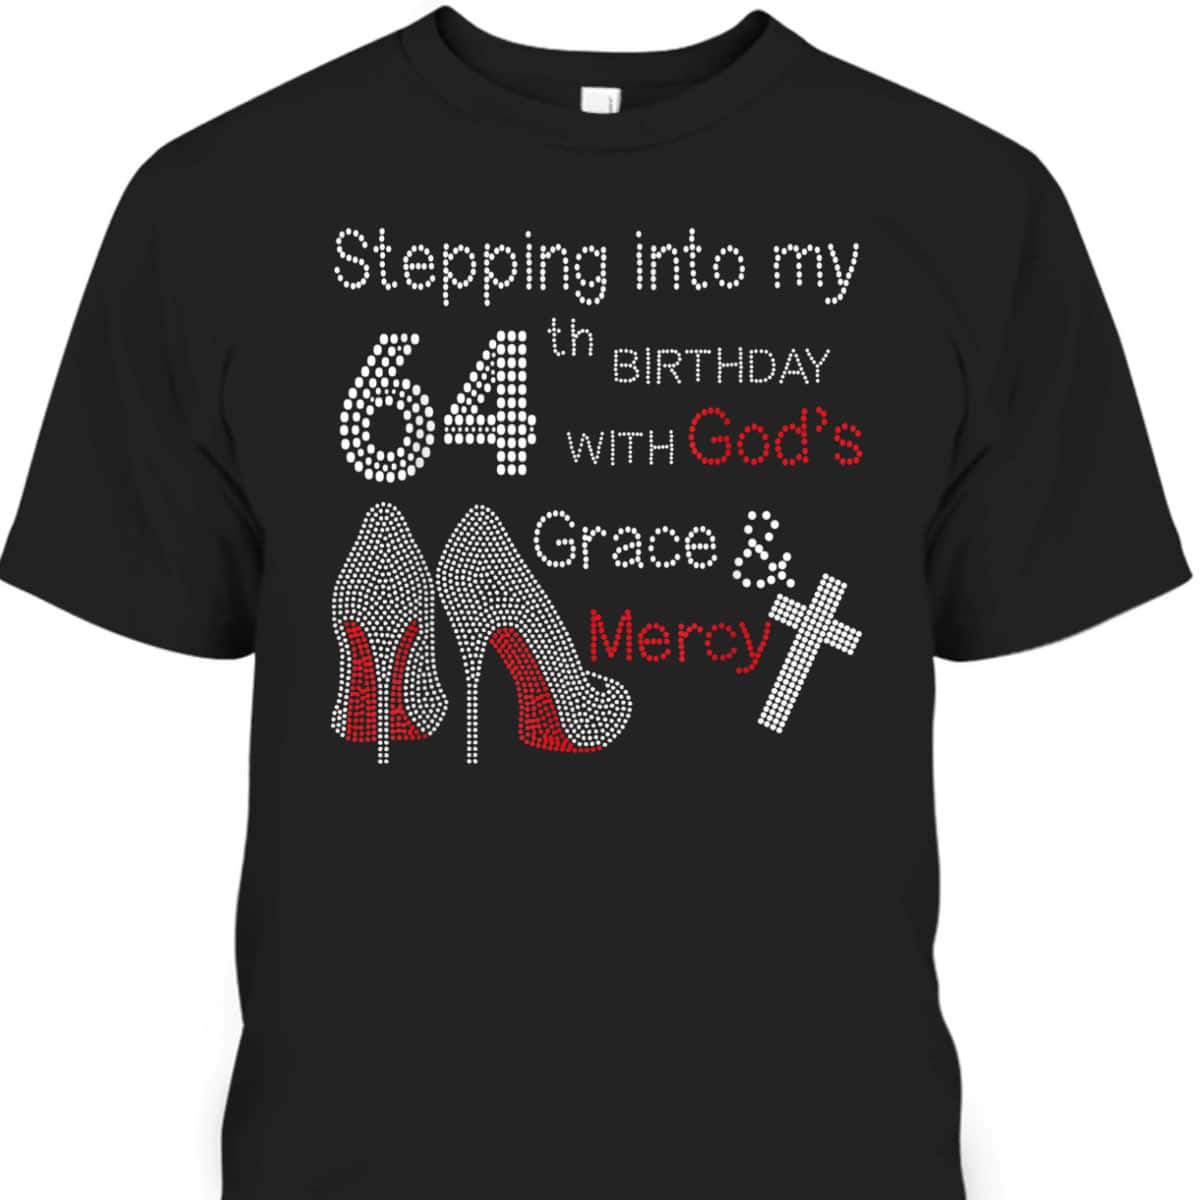 Christian Stepping Into My 64th Birthday With God's Grace And Mercy T-Shirt